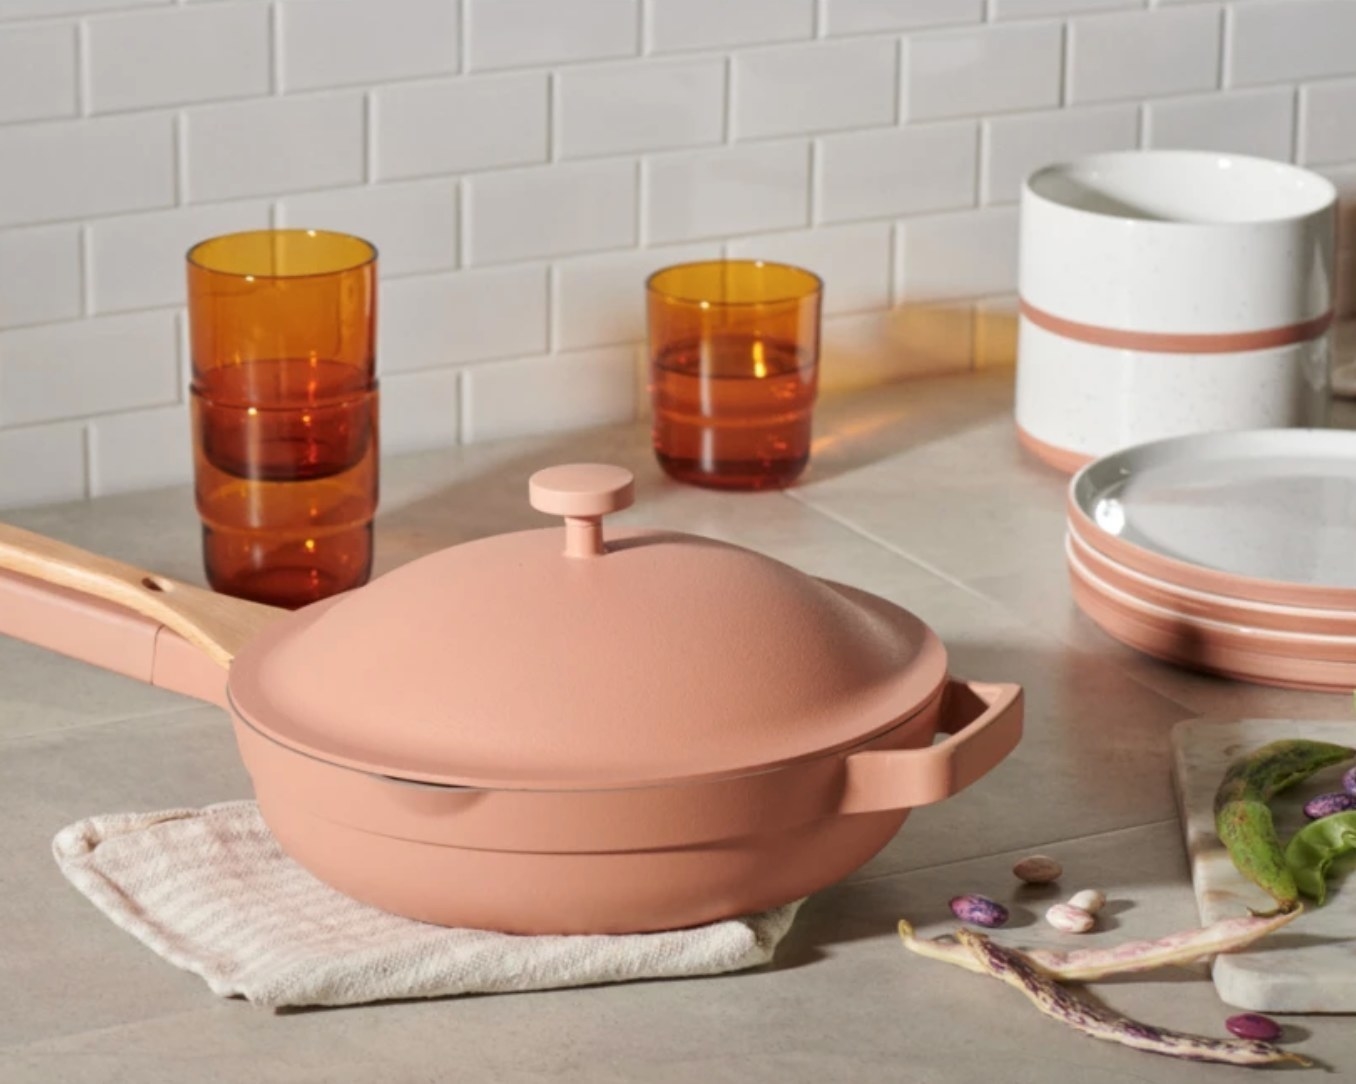 The deep skillet-like pan in a pinkish color with a full matching lid, and a bamboo stirrer attached to the handle